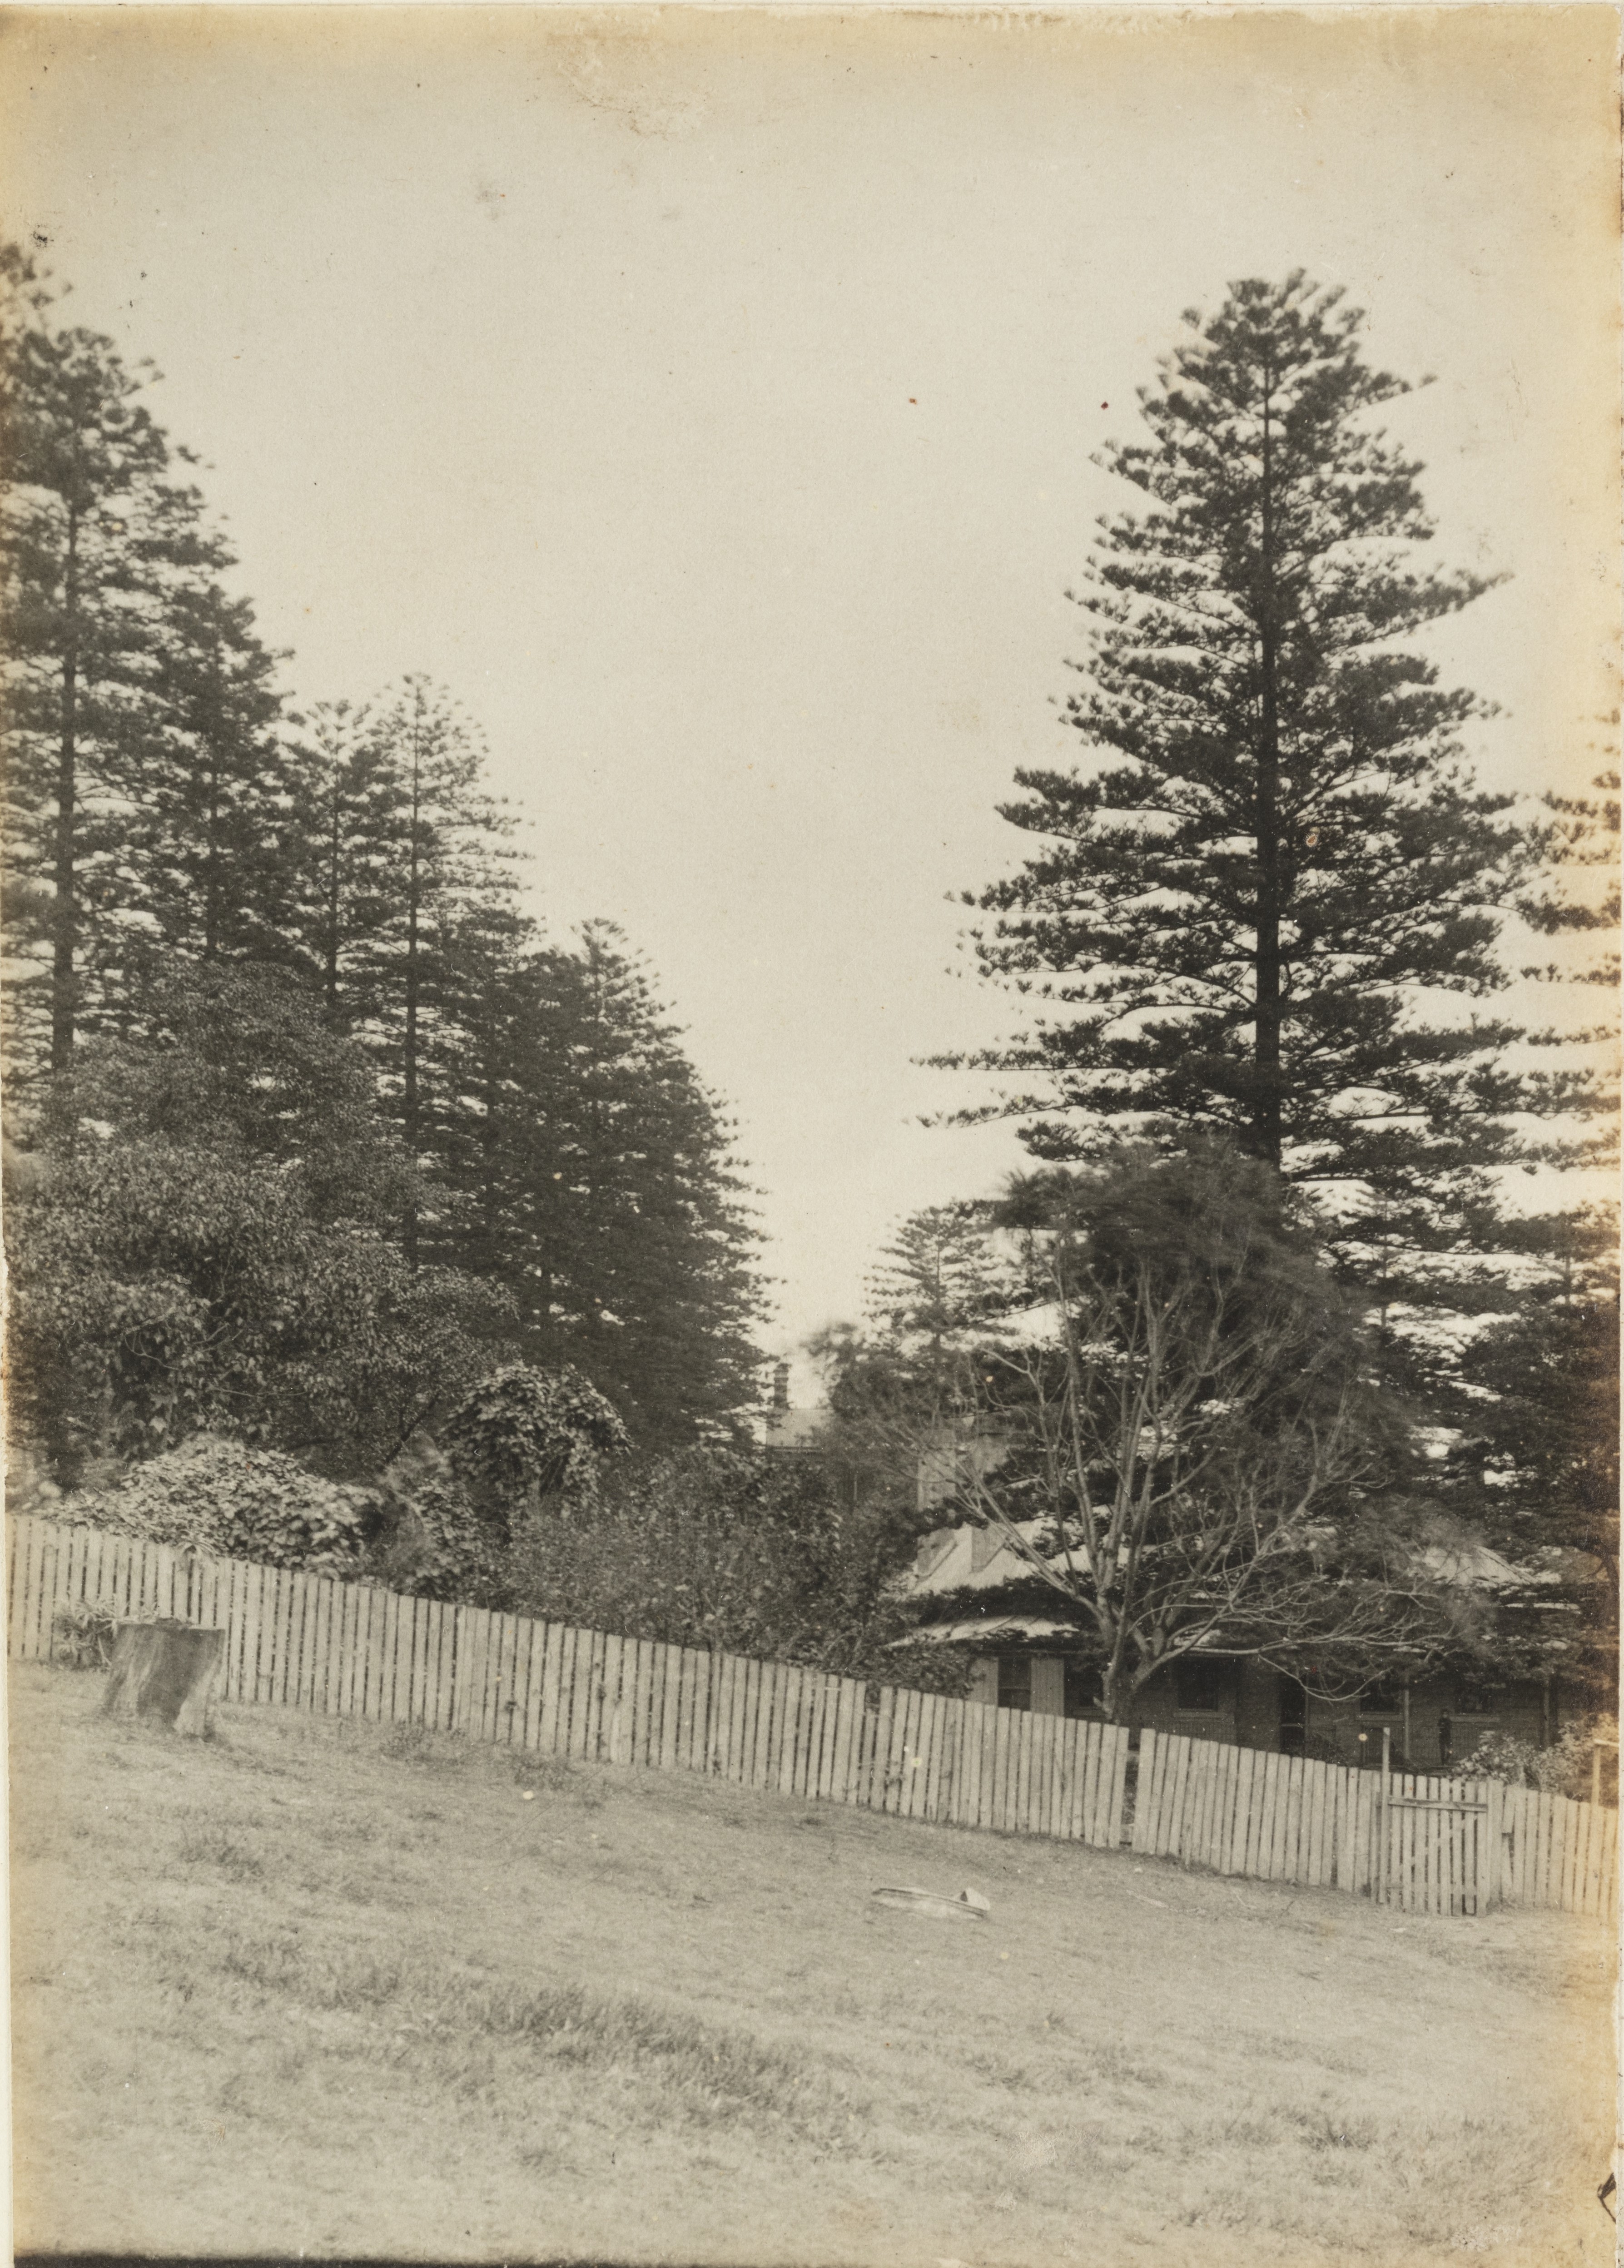 Photograph of Barcom Glen cottage and trees